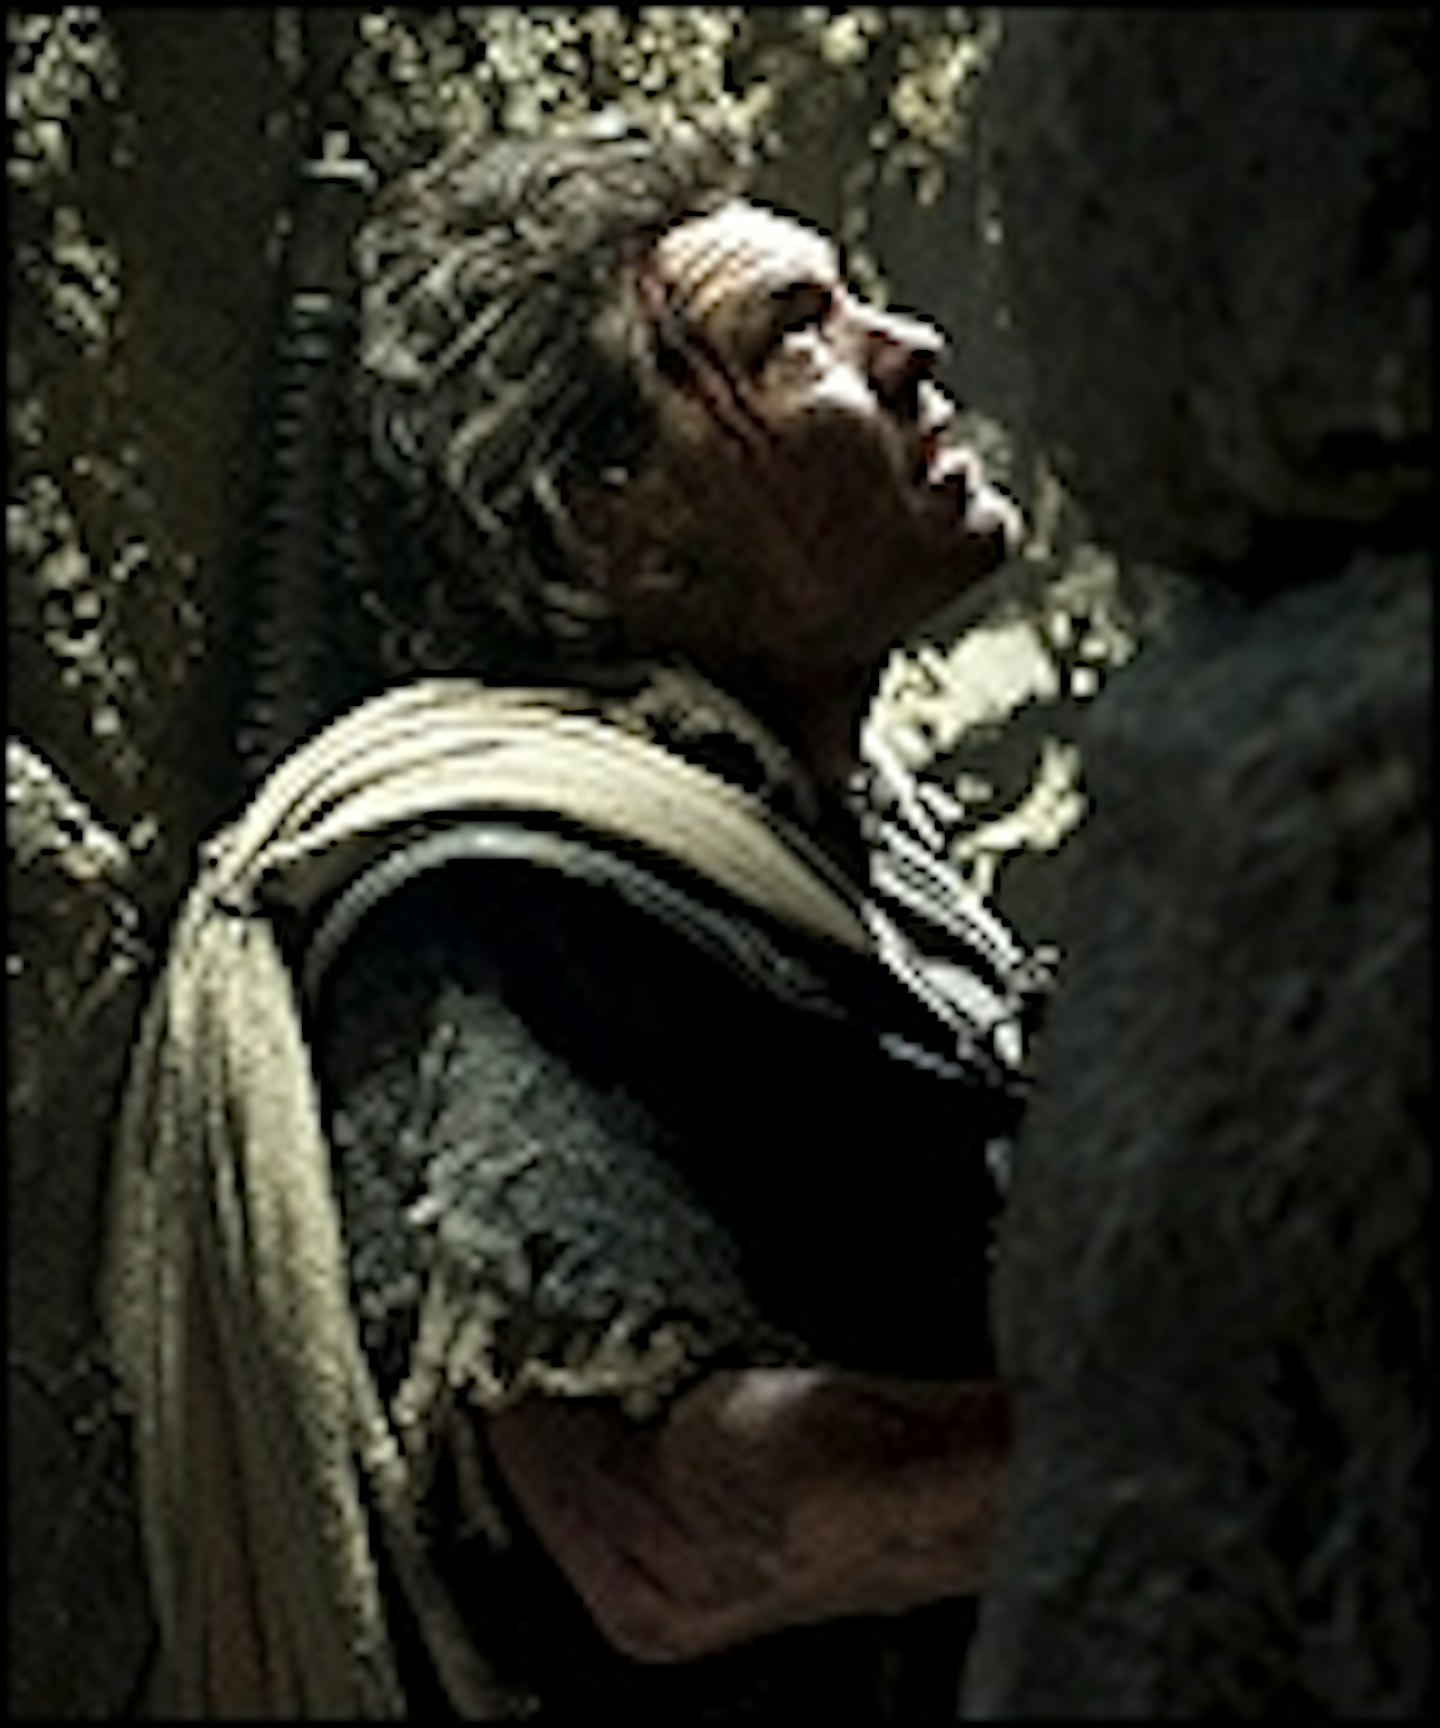 Movie Review  Wrath of the Titans: Sequel continues mythic firefight